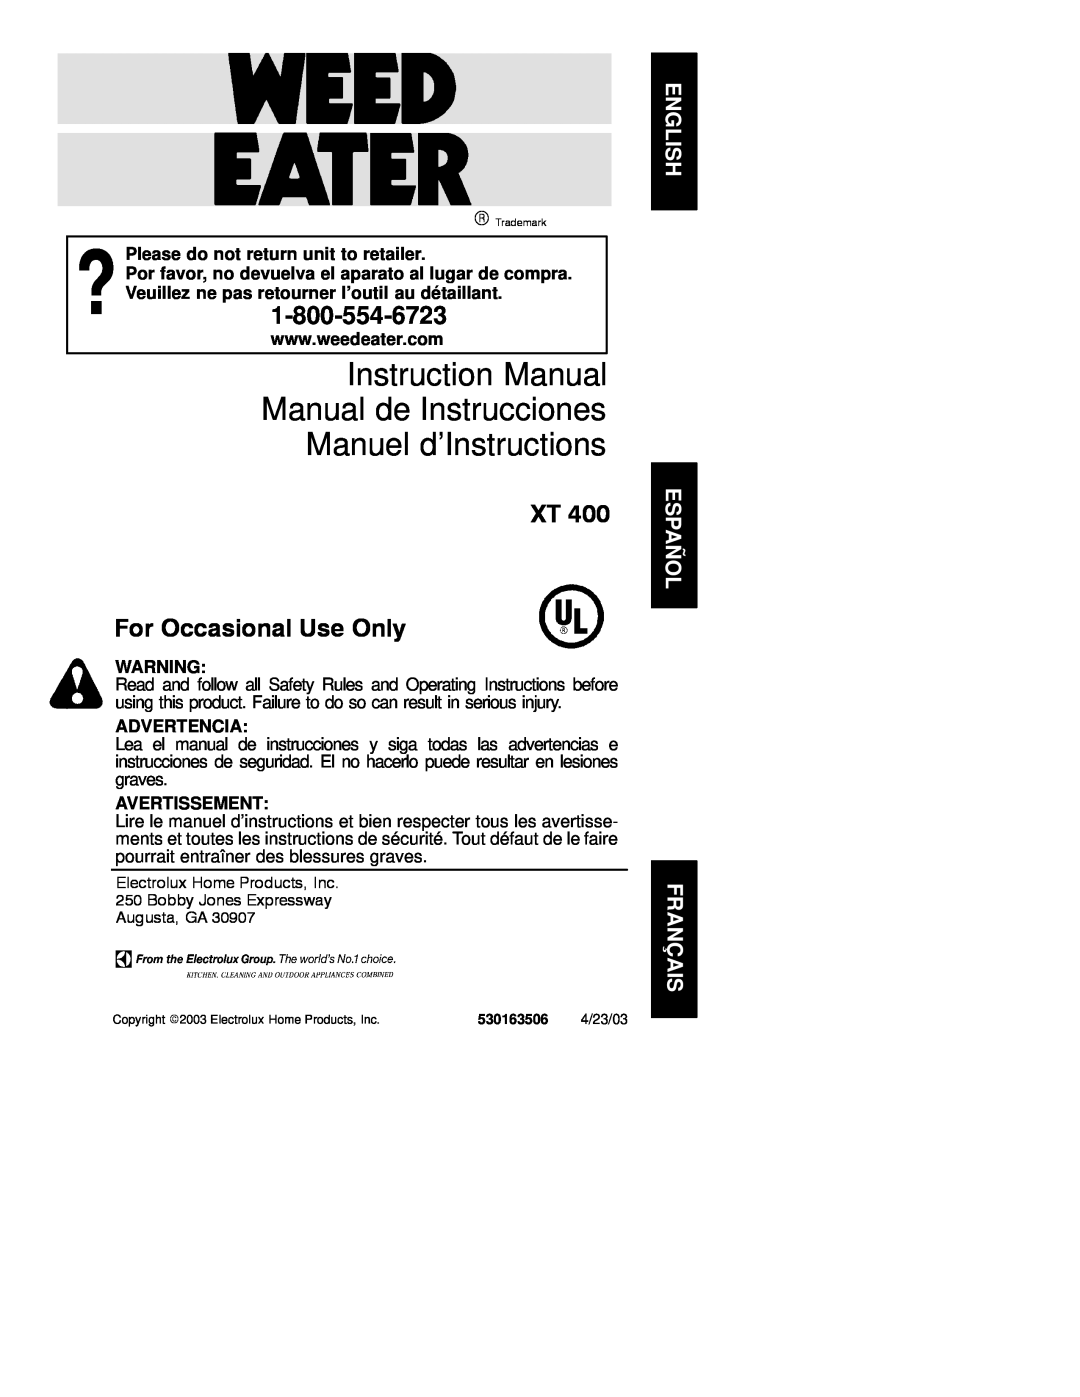 Weed Eater 530163506 instruction manual Please do not return unit to retailer, Advertencia, Avertissement 